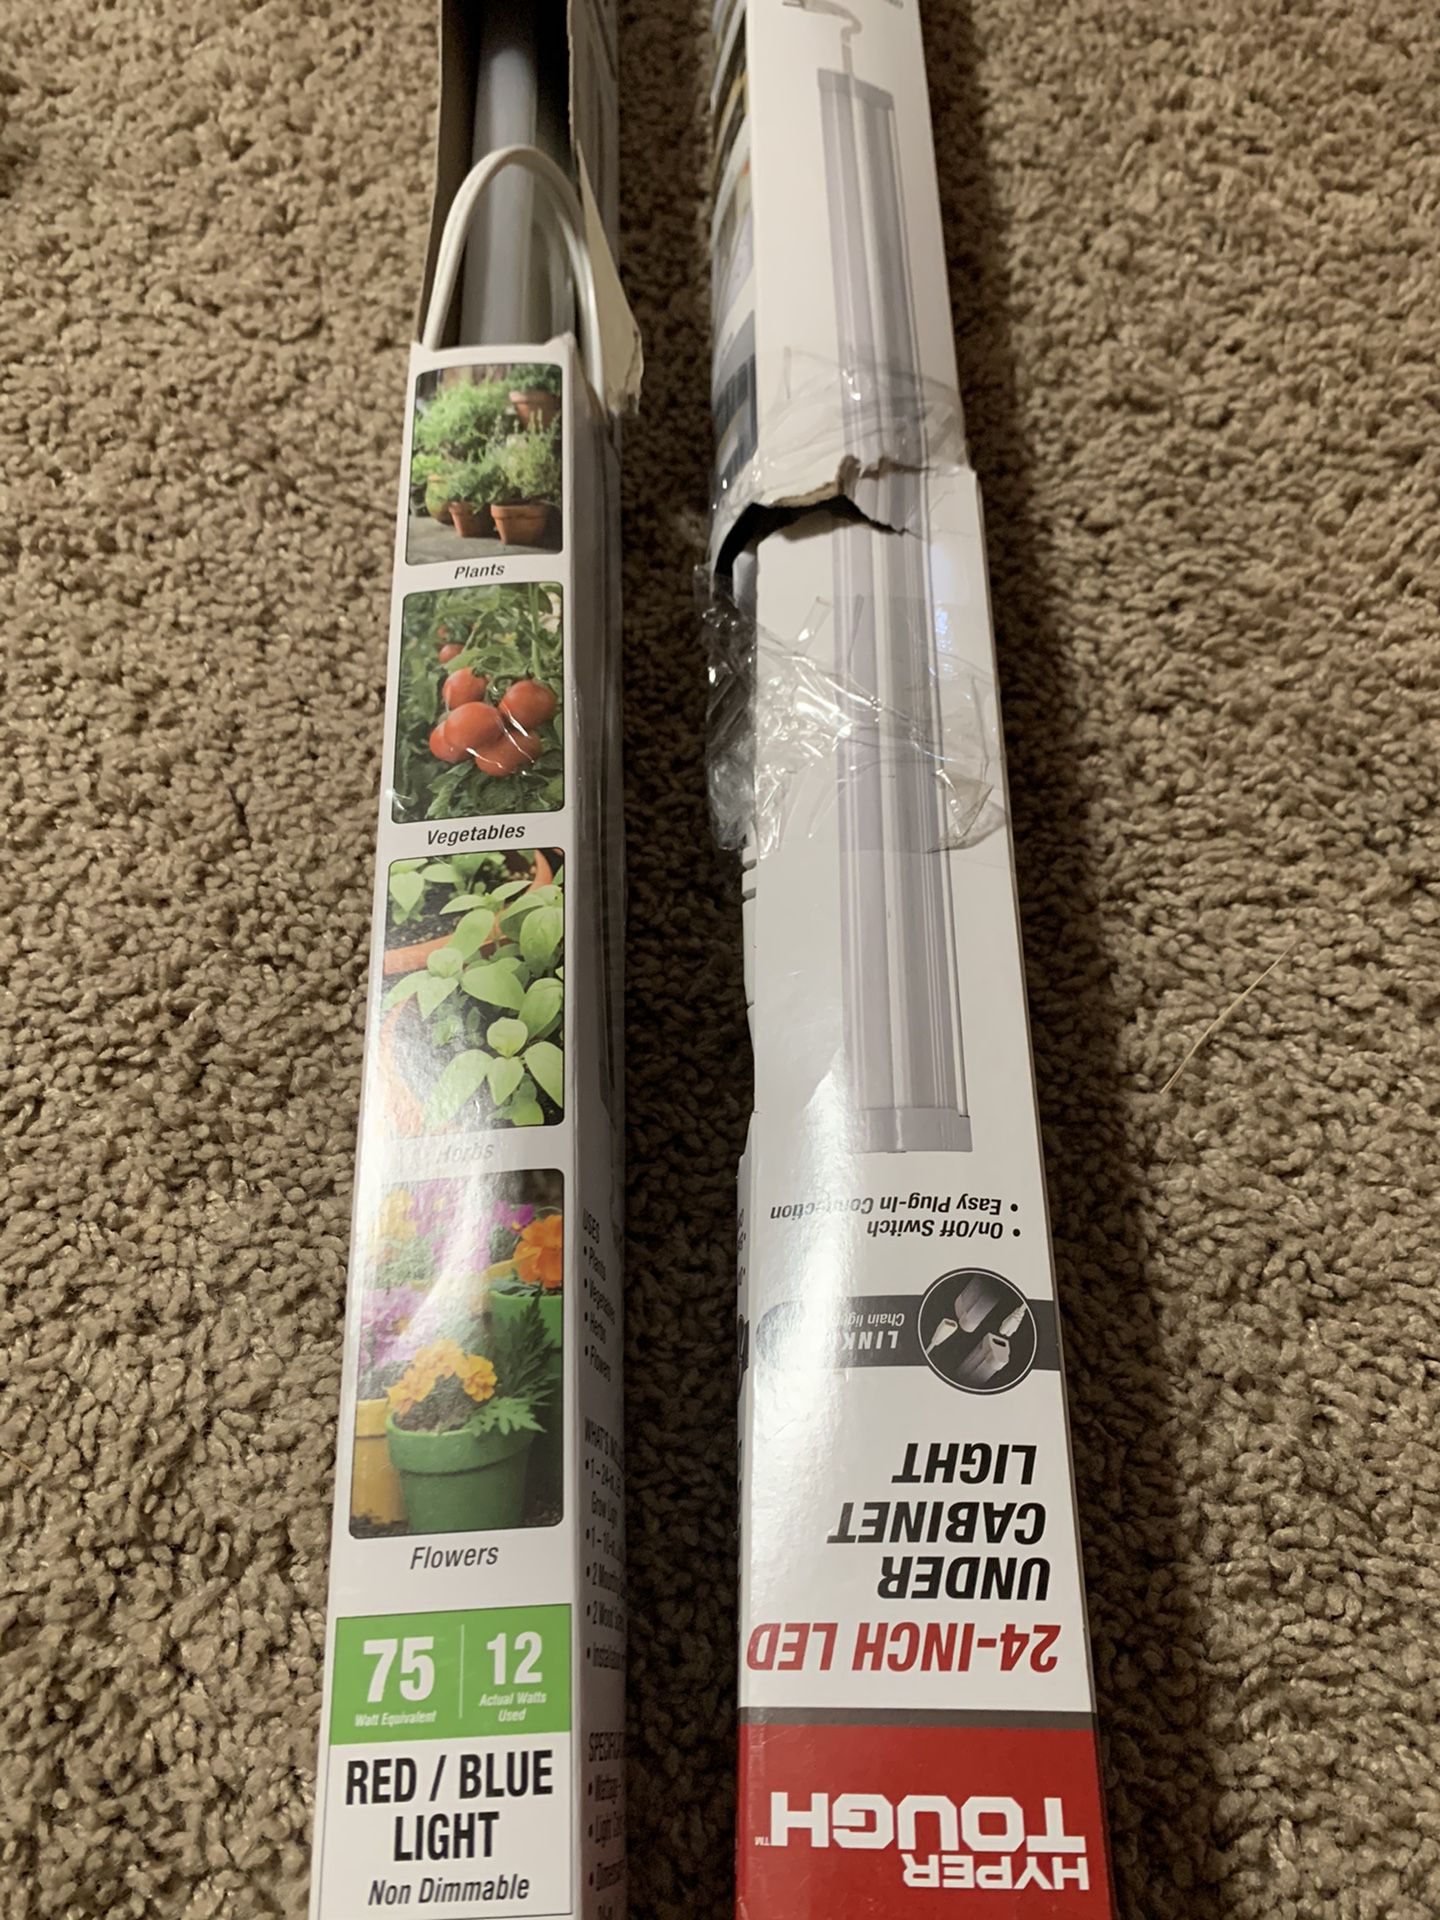 Grow light for plants, vegetables, herbs and flowers. MAKE ME OFFERS!